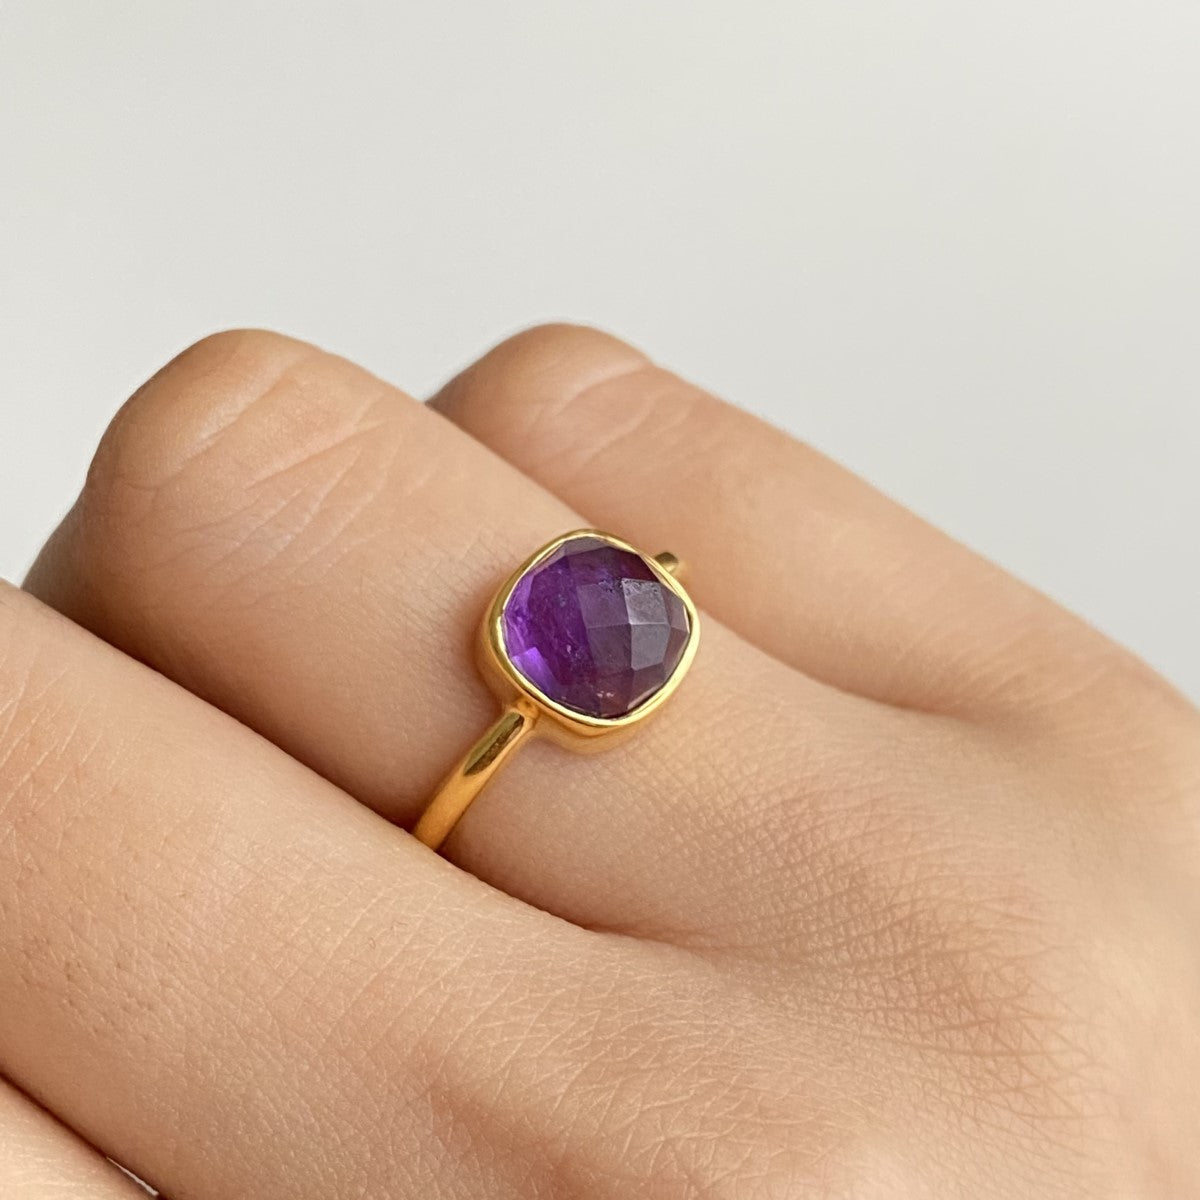 Faceted Square Cut Natural Gemstone Gold Plated Sterling Silver Solitaire Ring - Amethyst